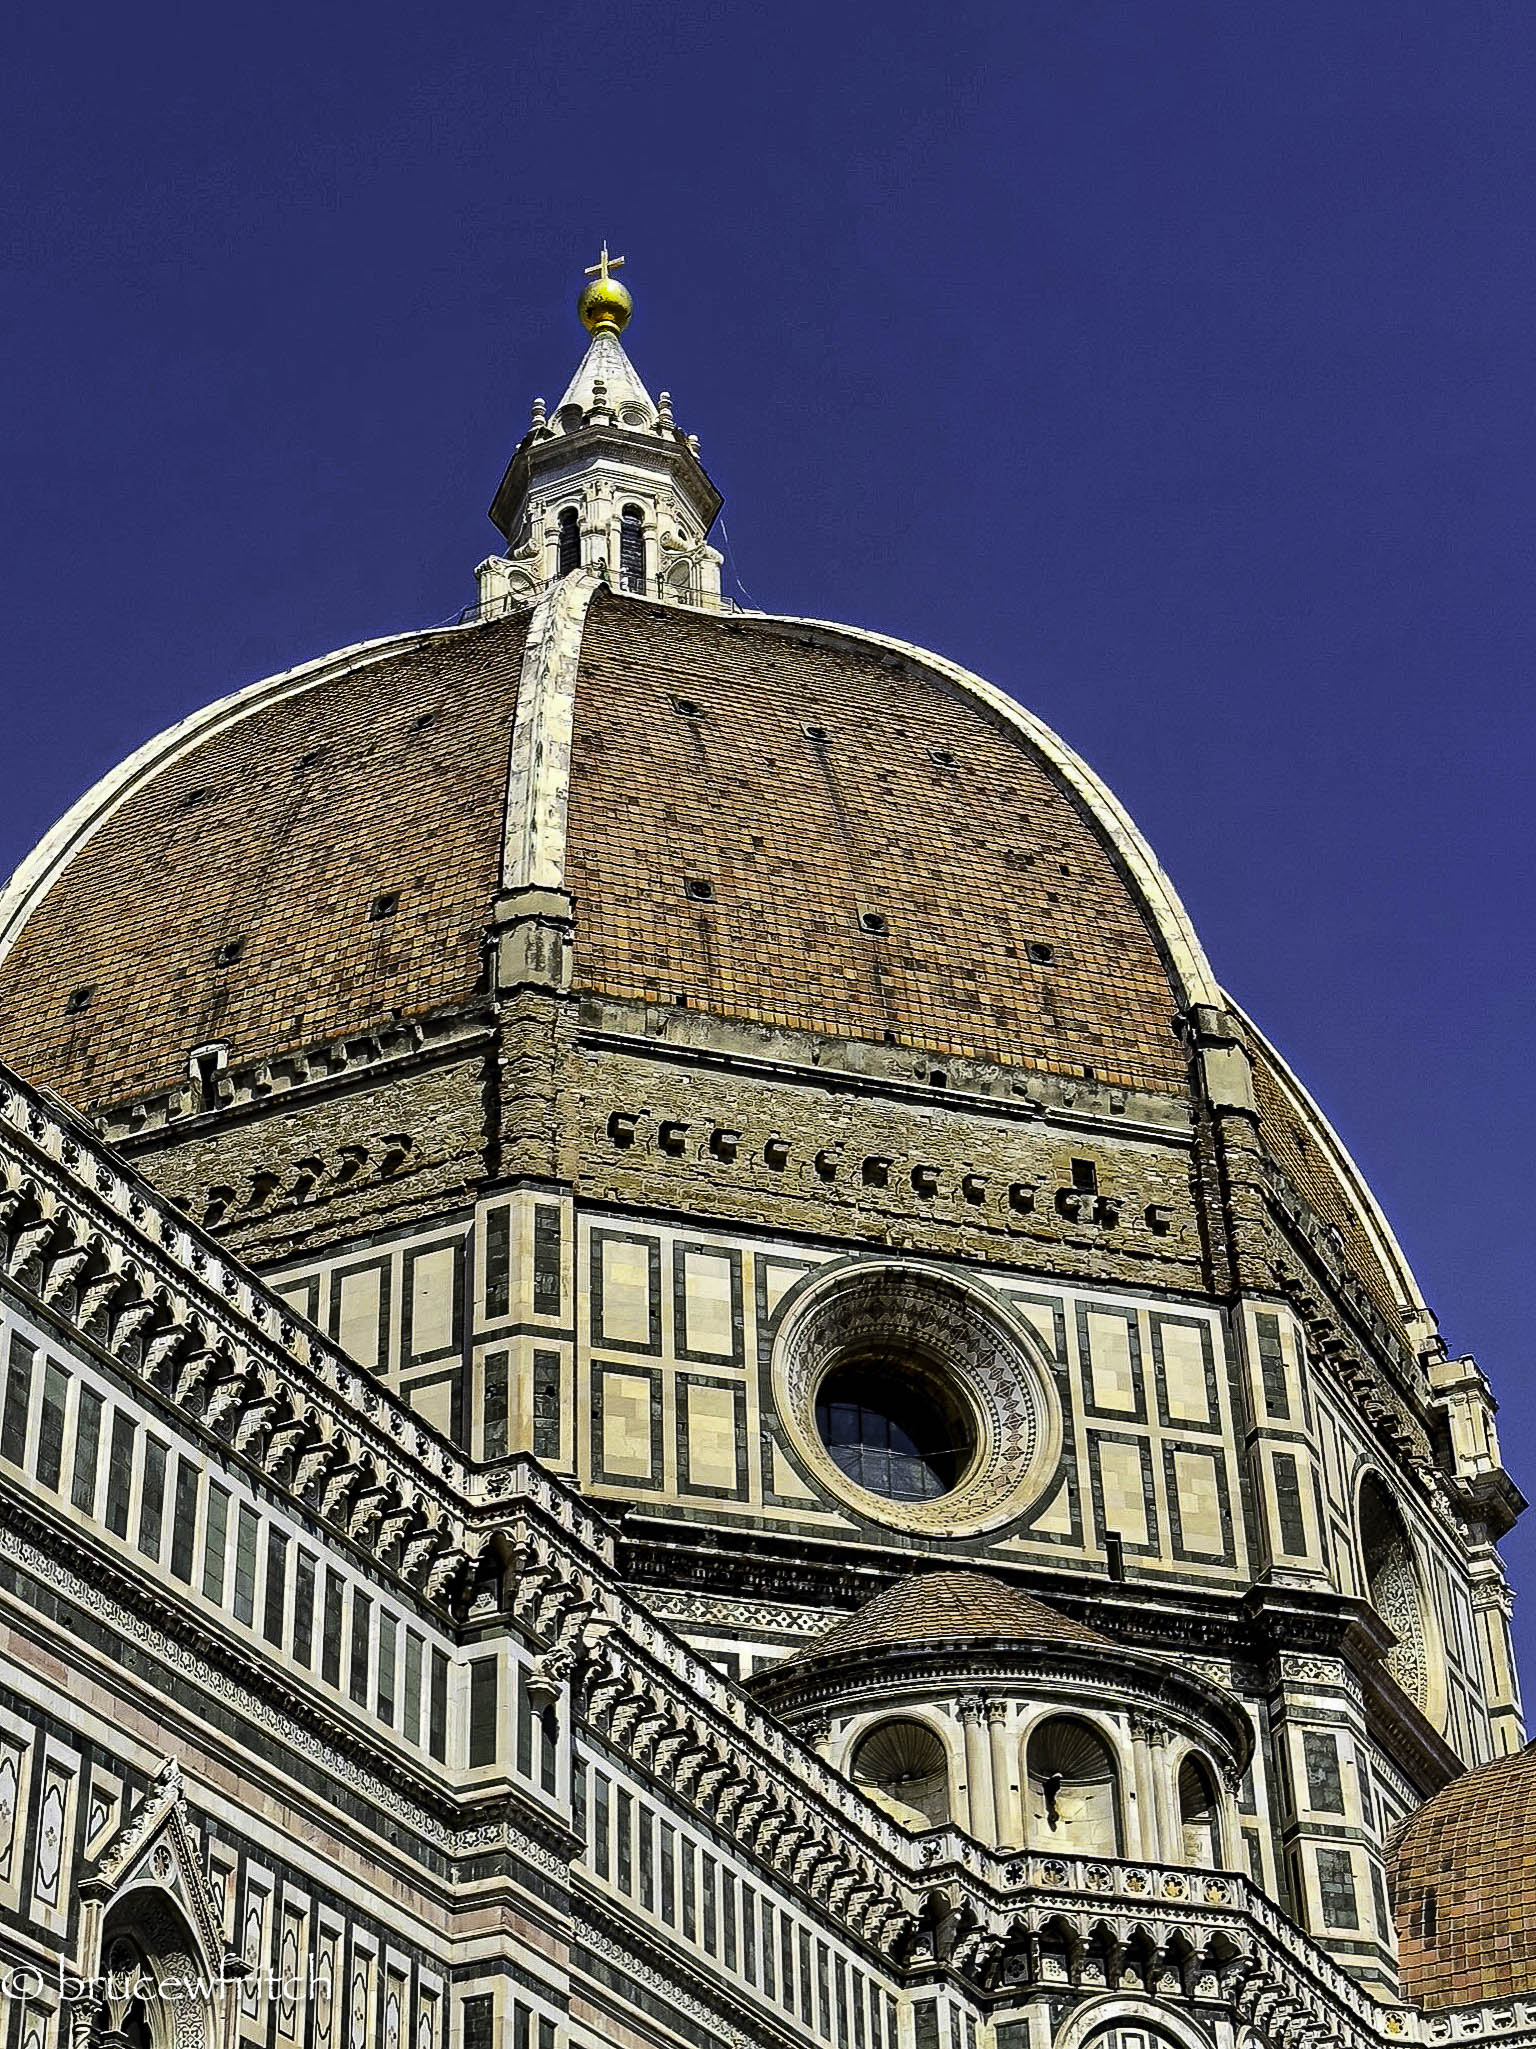 Lorenzo Medici's Crowning Achievement as it Correlates to the Crucial Role of a CEO